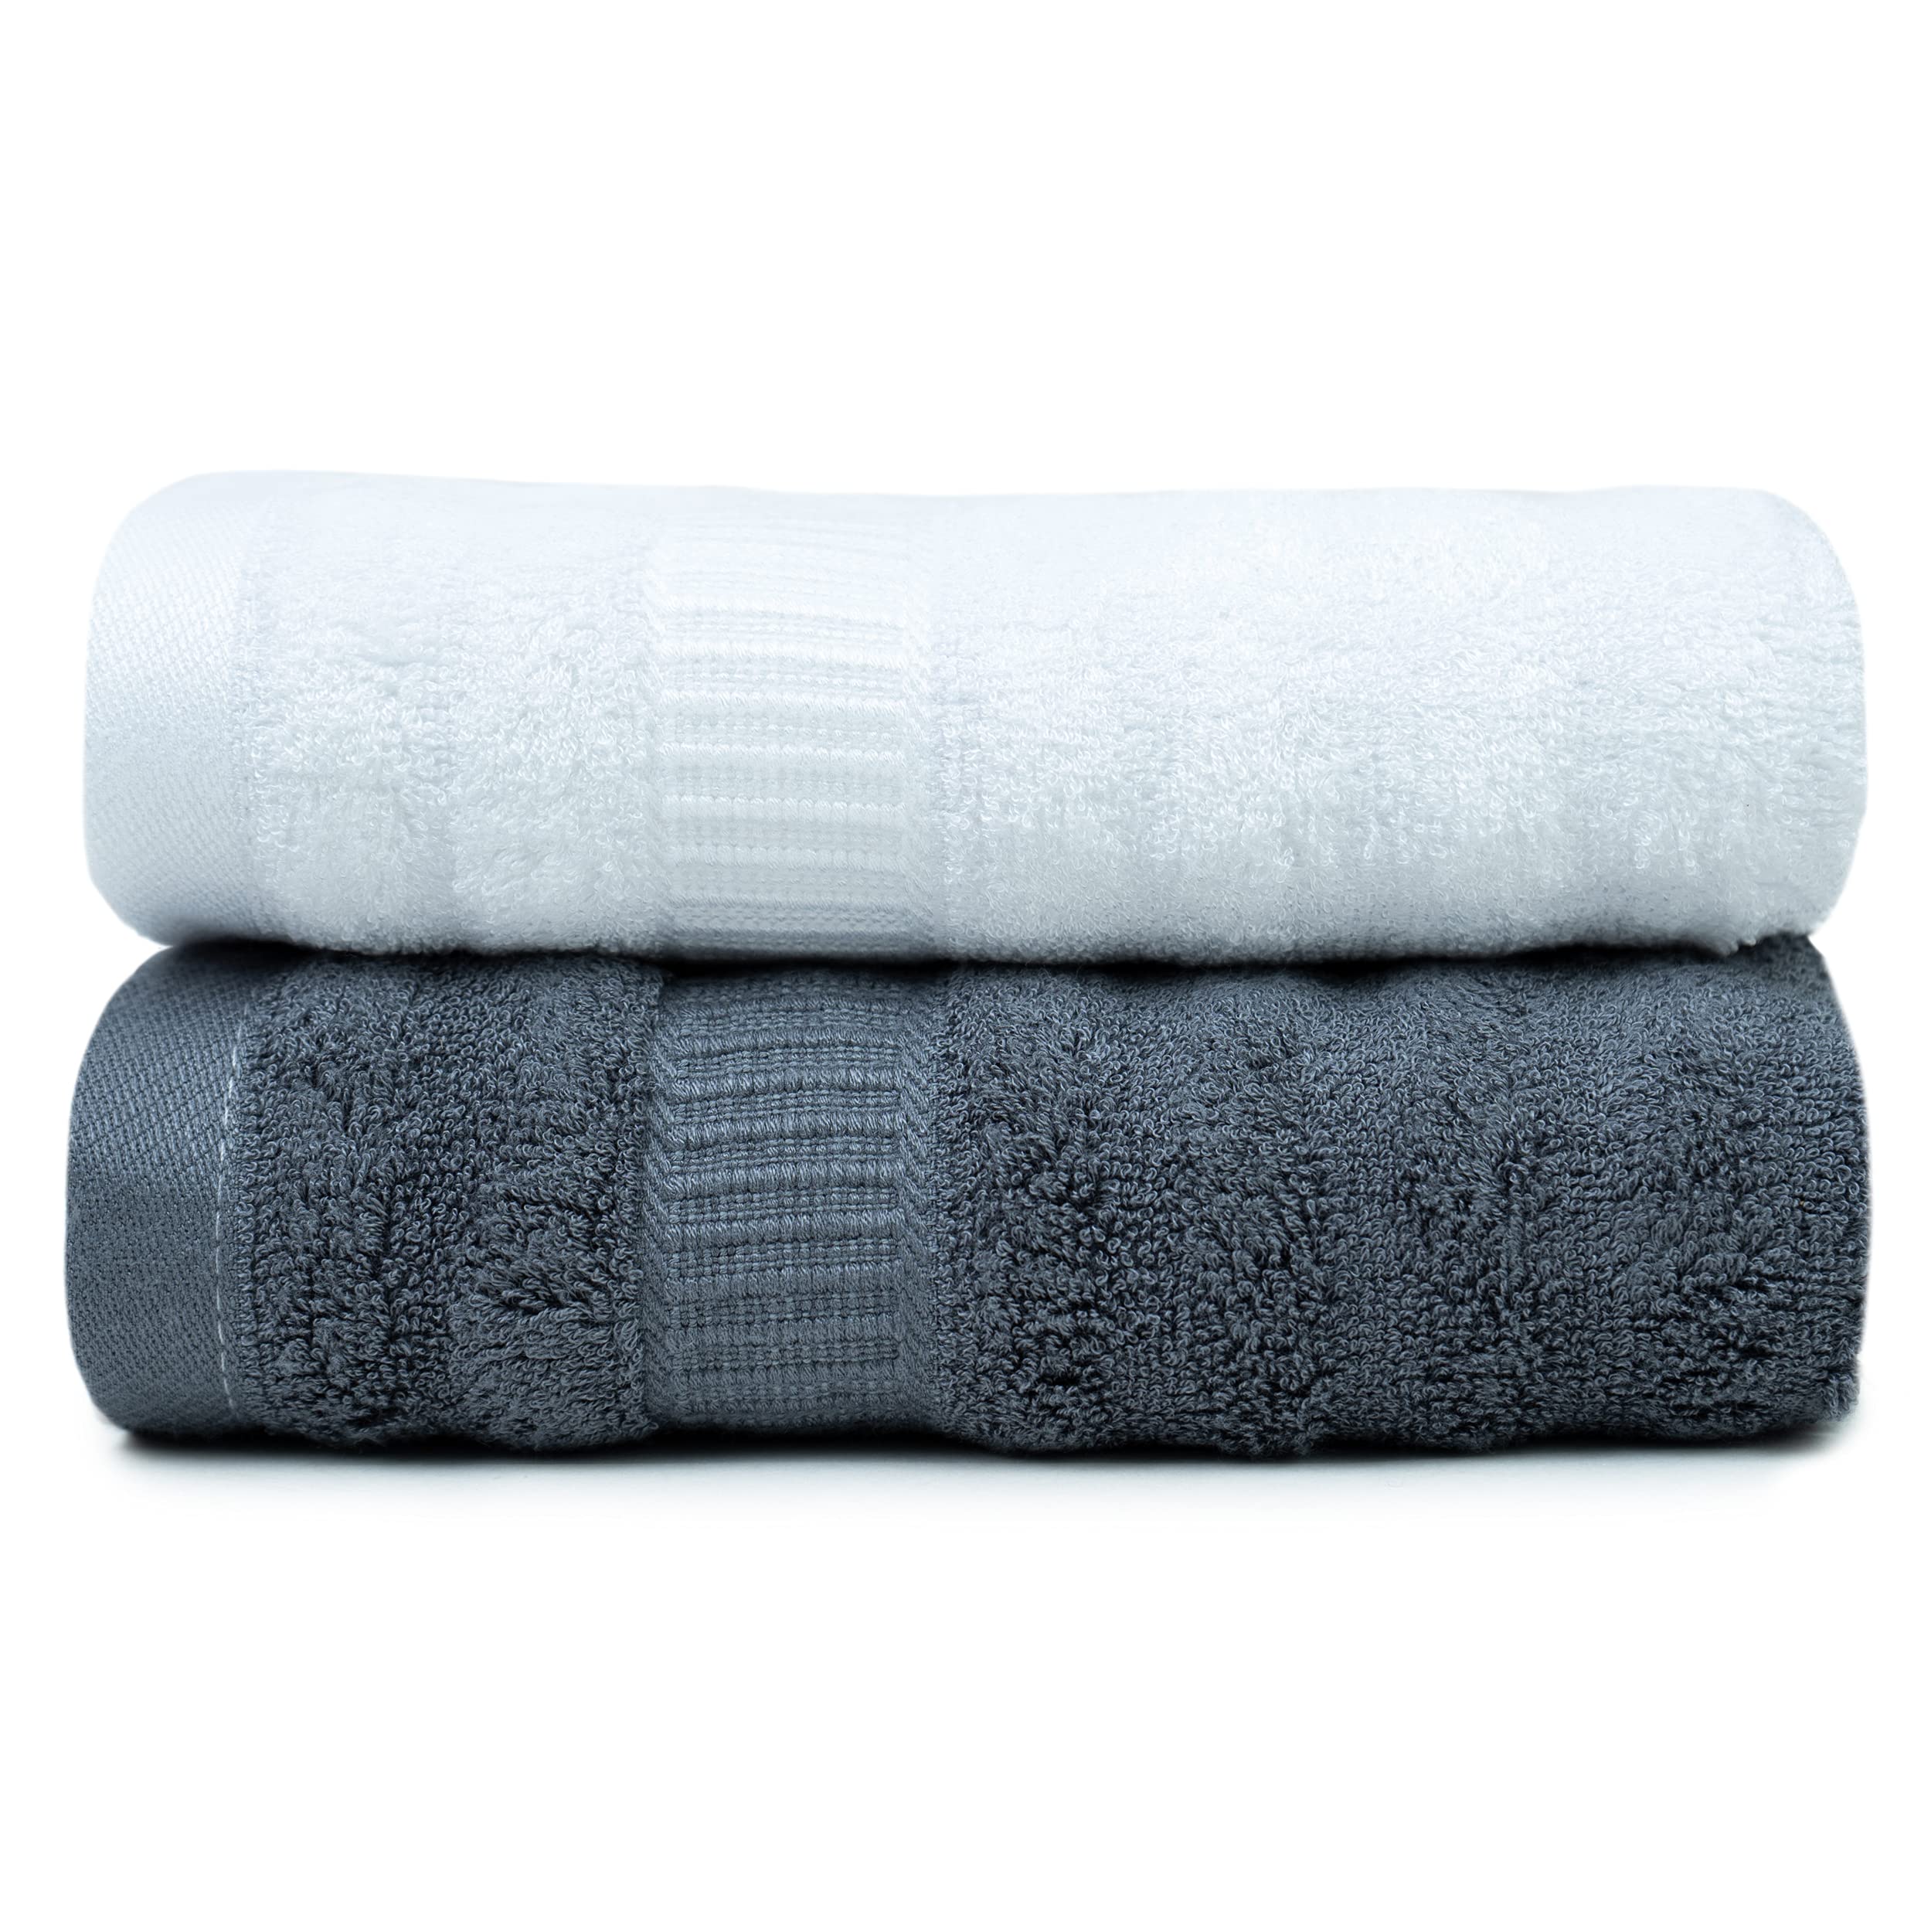 Mush 600 GSM Hand Towel Set of 2 | 100% Bamboo Hand Towel |Ultra Soft, Absorbent & Quick Dry Towel for Gym, Pool, Travel, Spa and Yoga | 29.5 x 14 Inches (Grey & White)